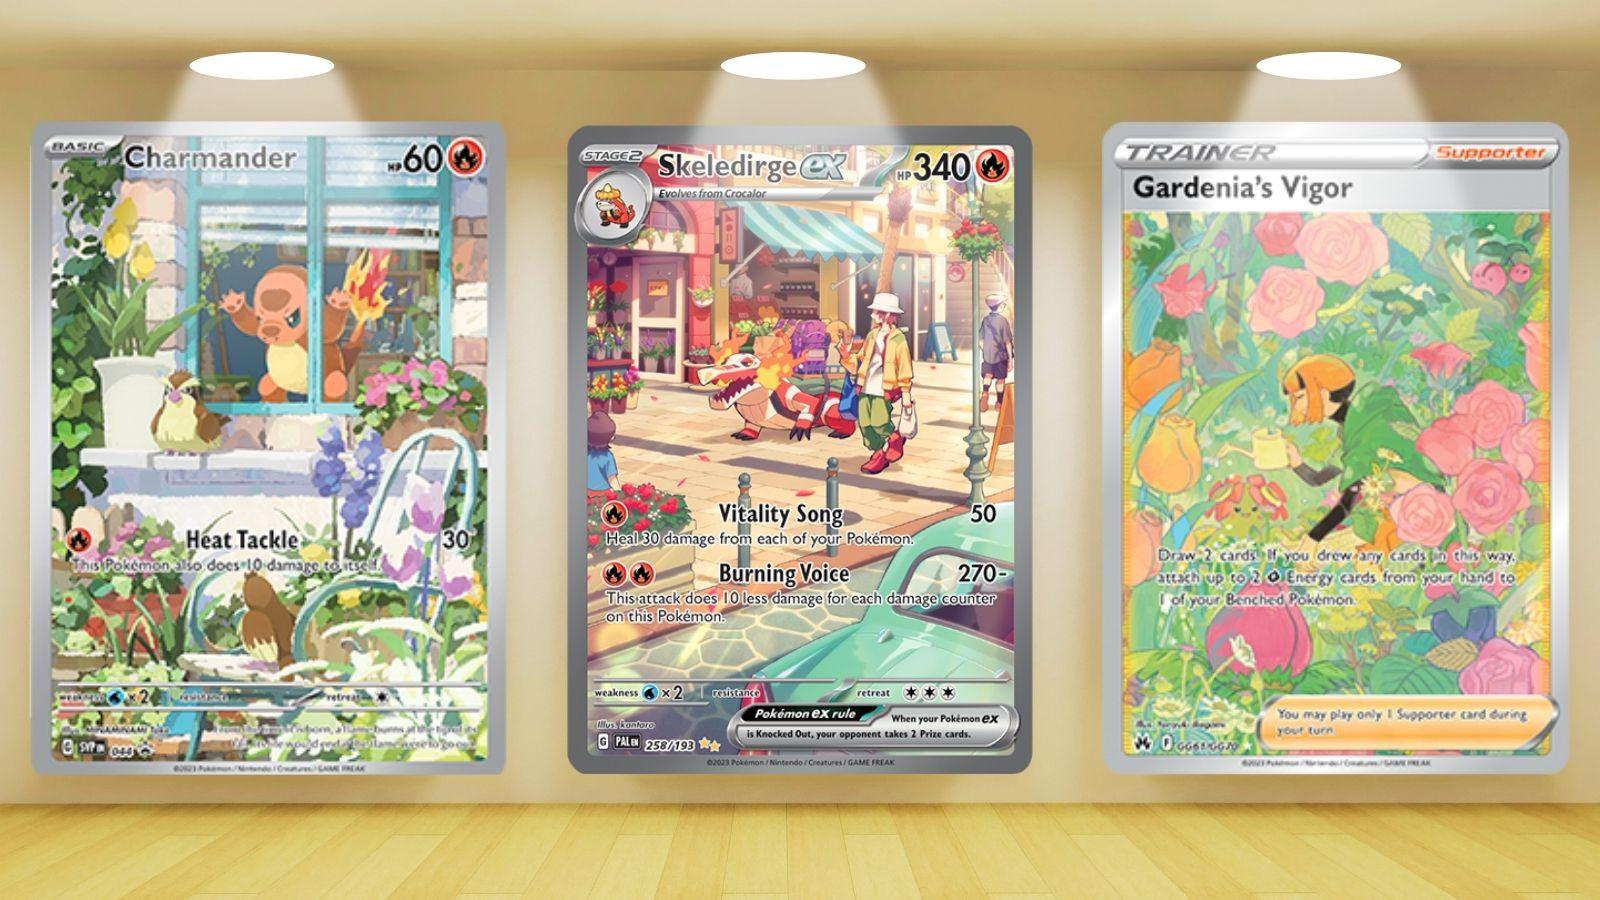 Pokemon TCG cards showing Skeldiurge at a market with its trainer, a Charmander pressing its face angrily against the window looking at a Podgy and gym leader Gardenia watering Pokemon surrounded by plants